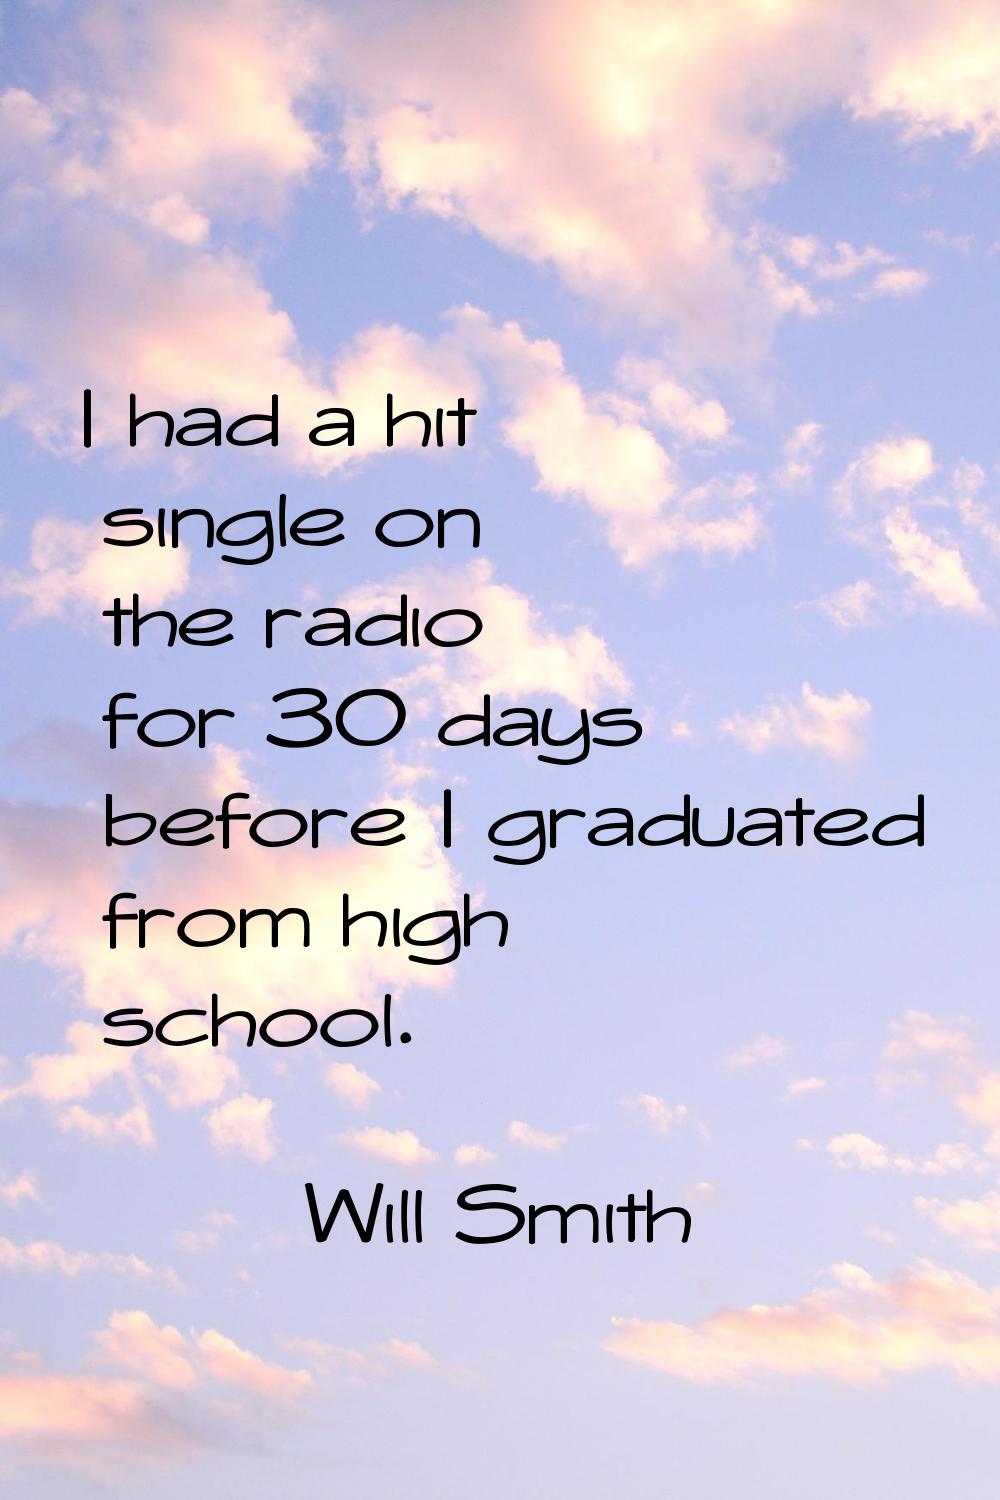 I had a hit single on the radio for 30 days before I graduated from high school.